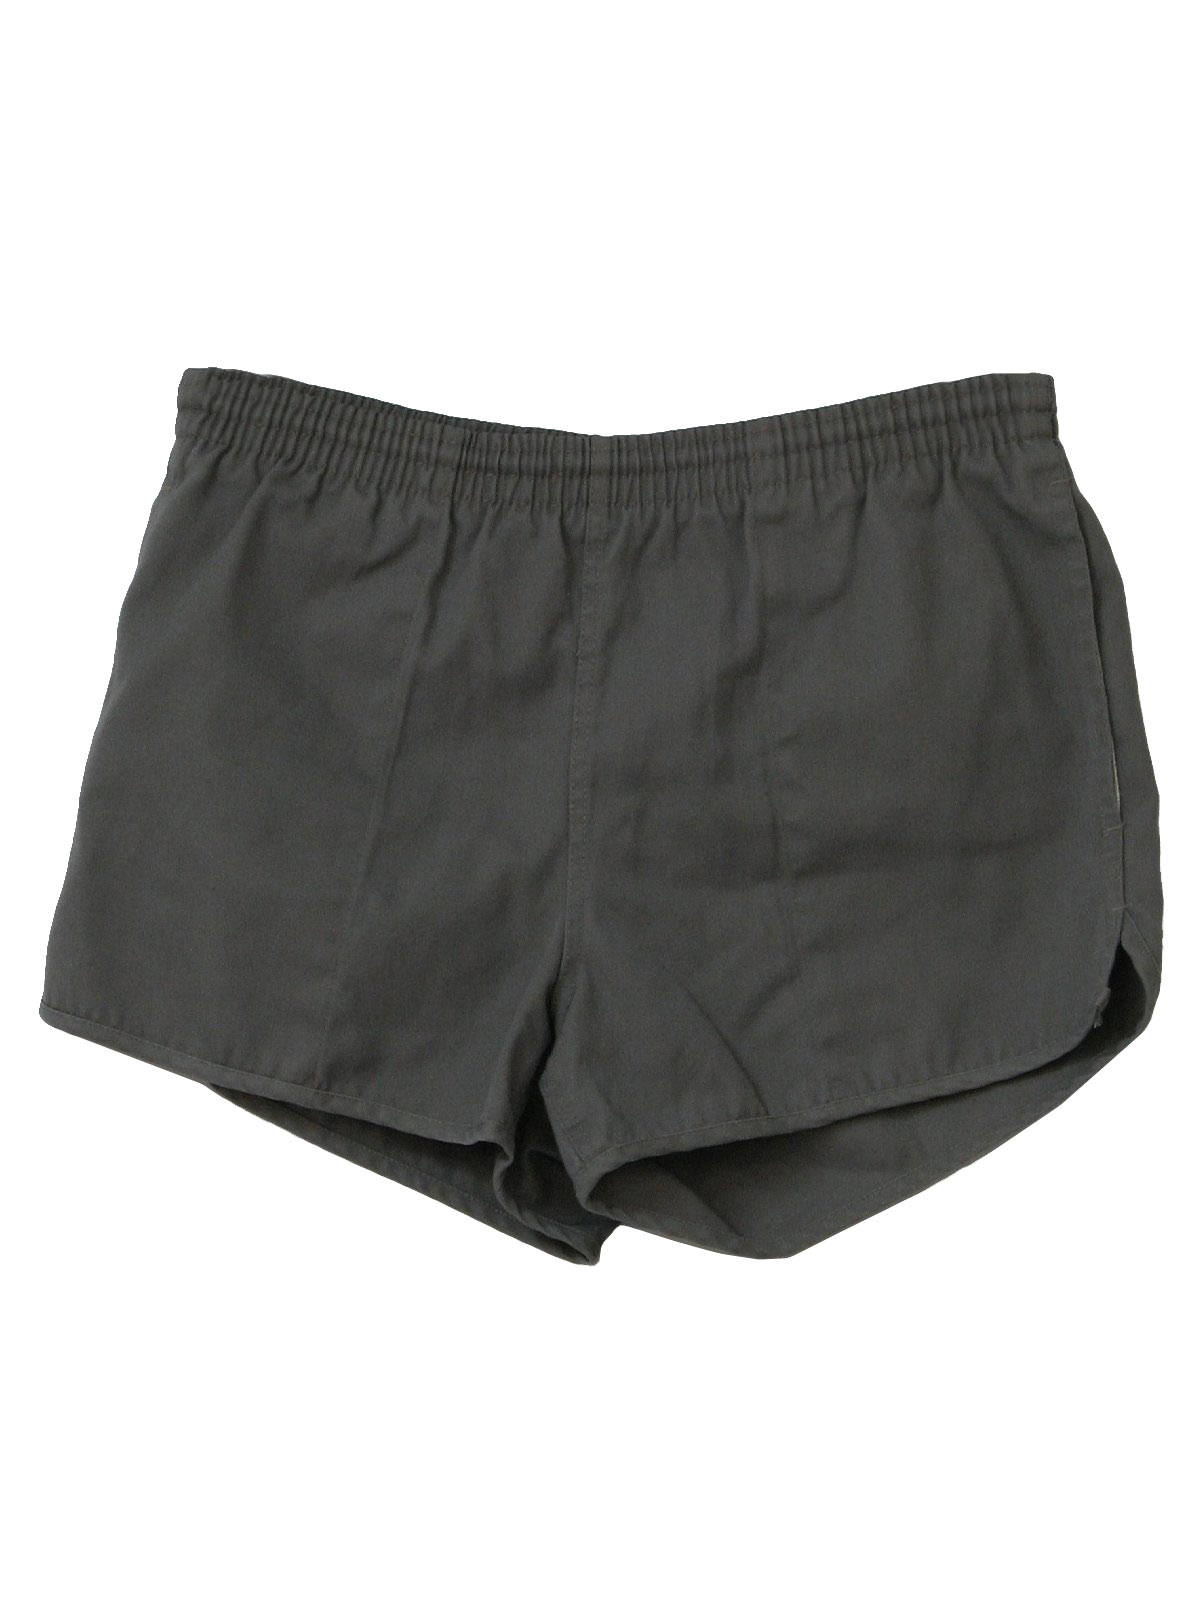 Retro 80's Shorts: 80s -Care Label- Mens grey polyester and cotton ...